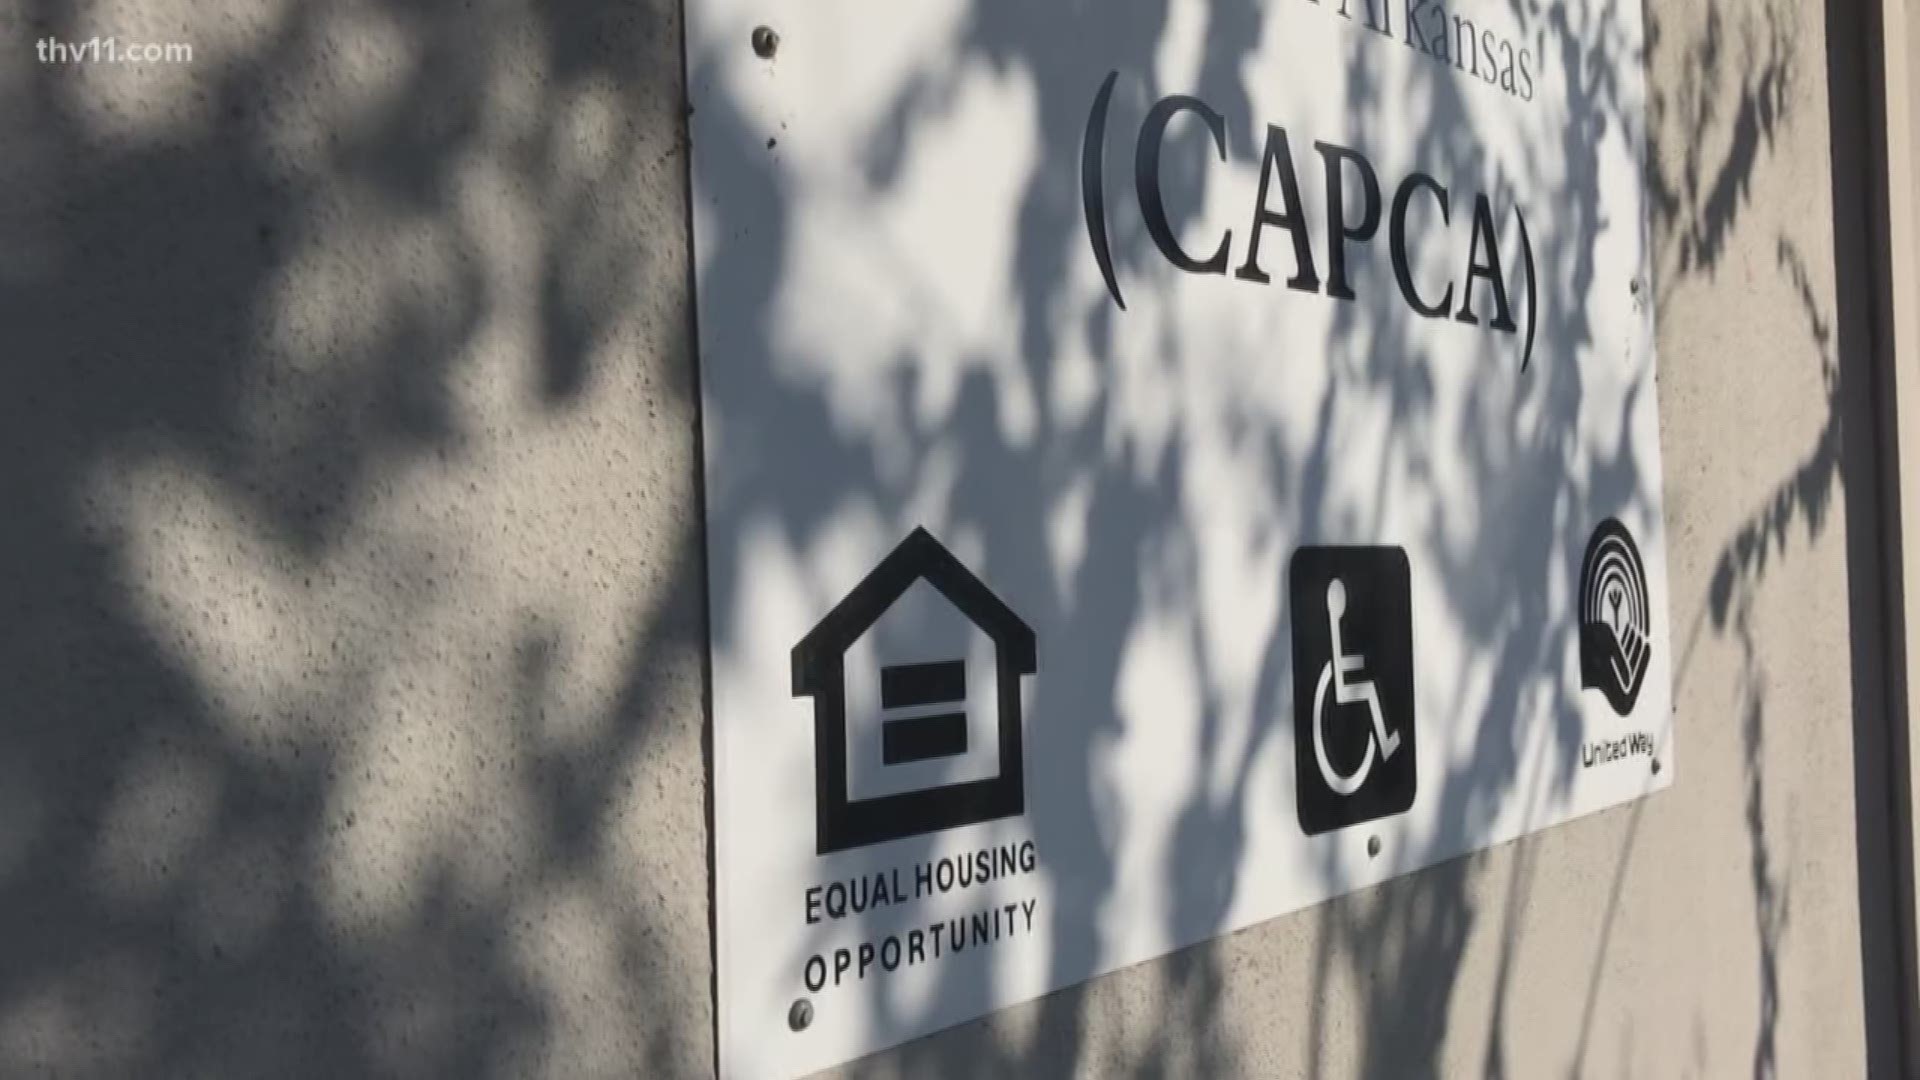 CAPCA saw lots of need over the summer break, so they're hoping to help children every break.